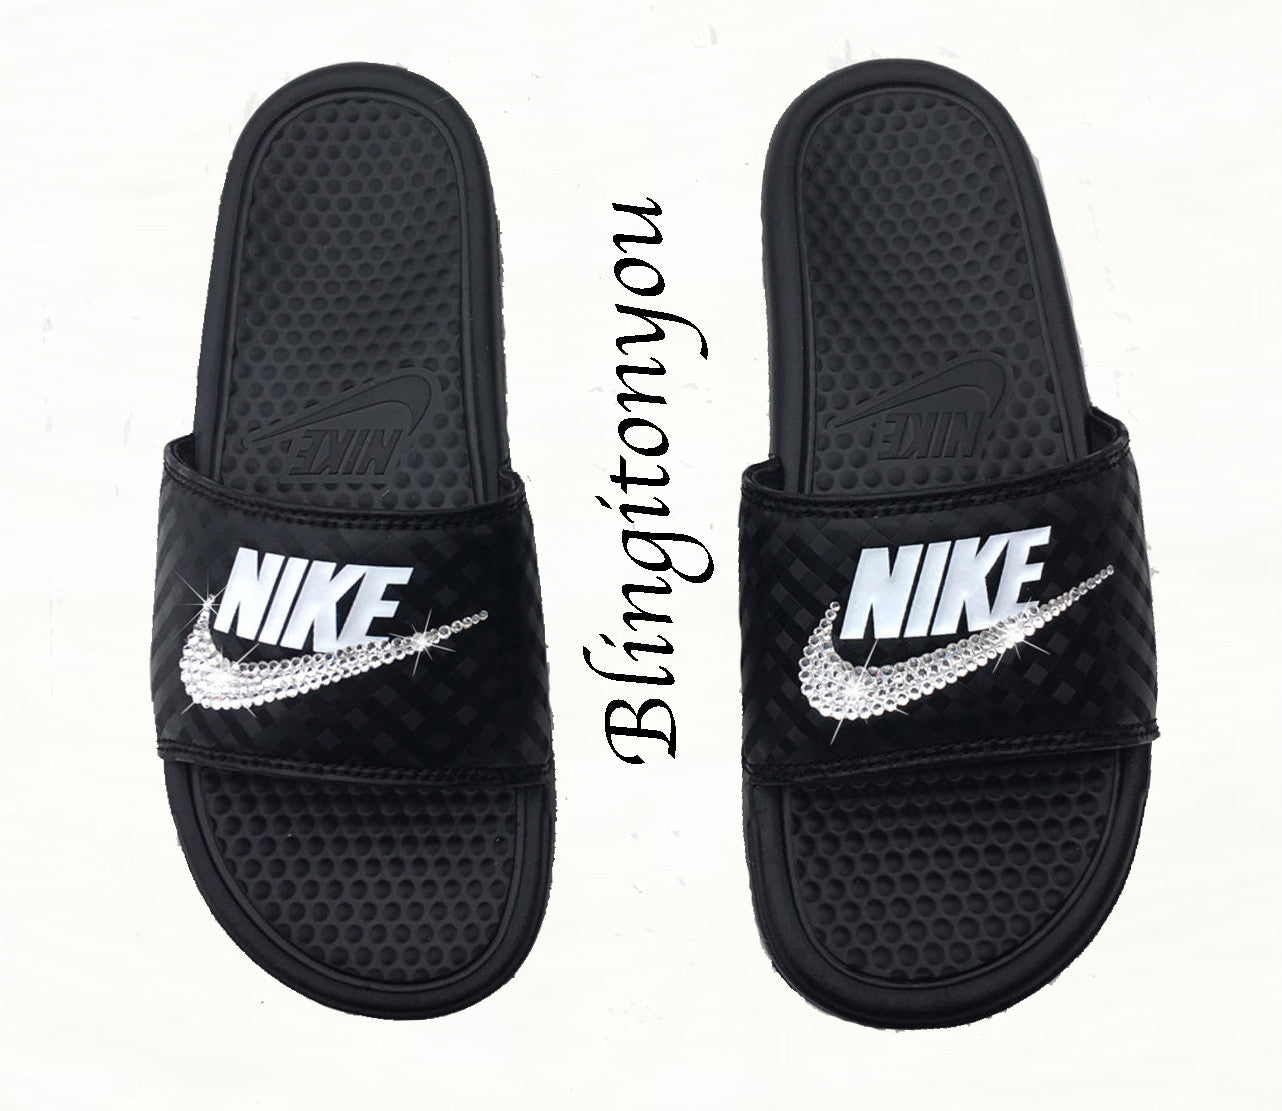 womens nike sandals on sale